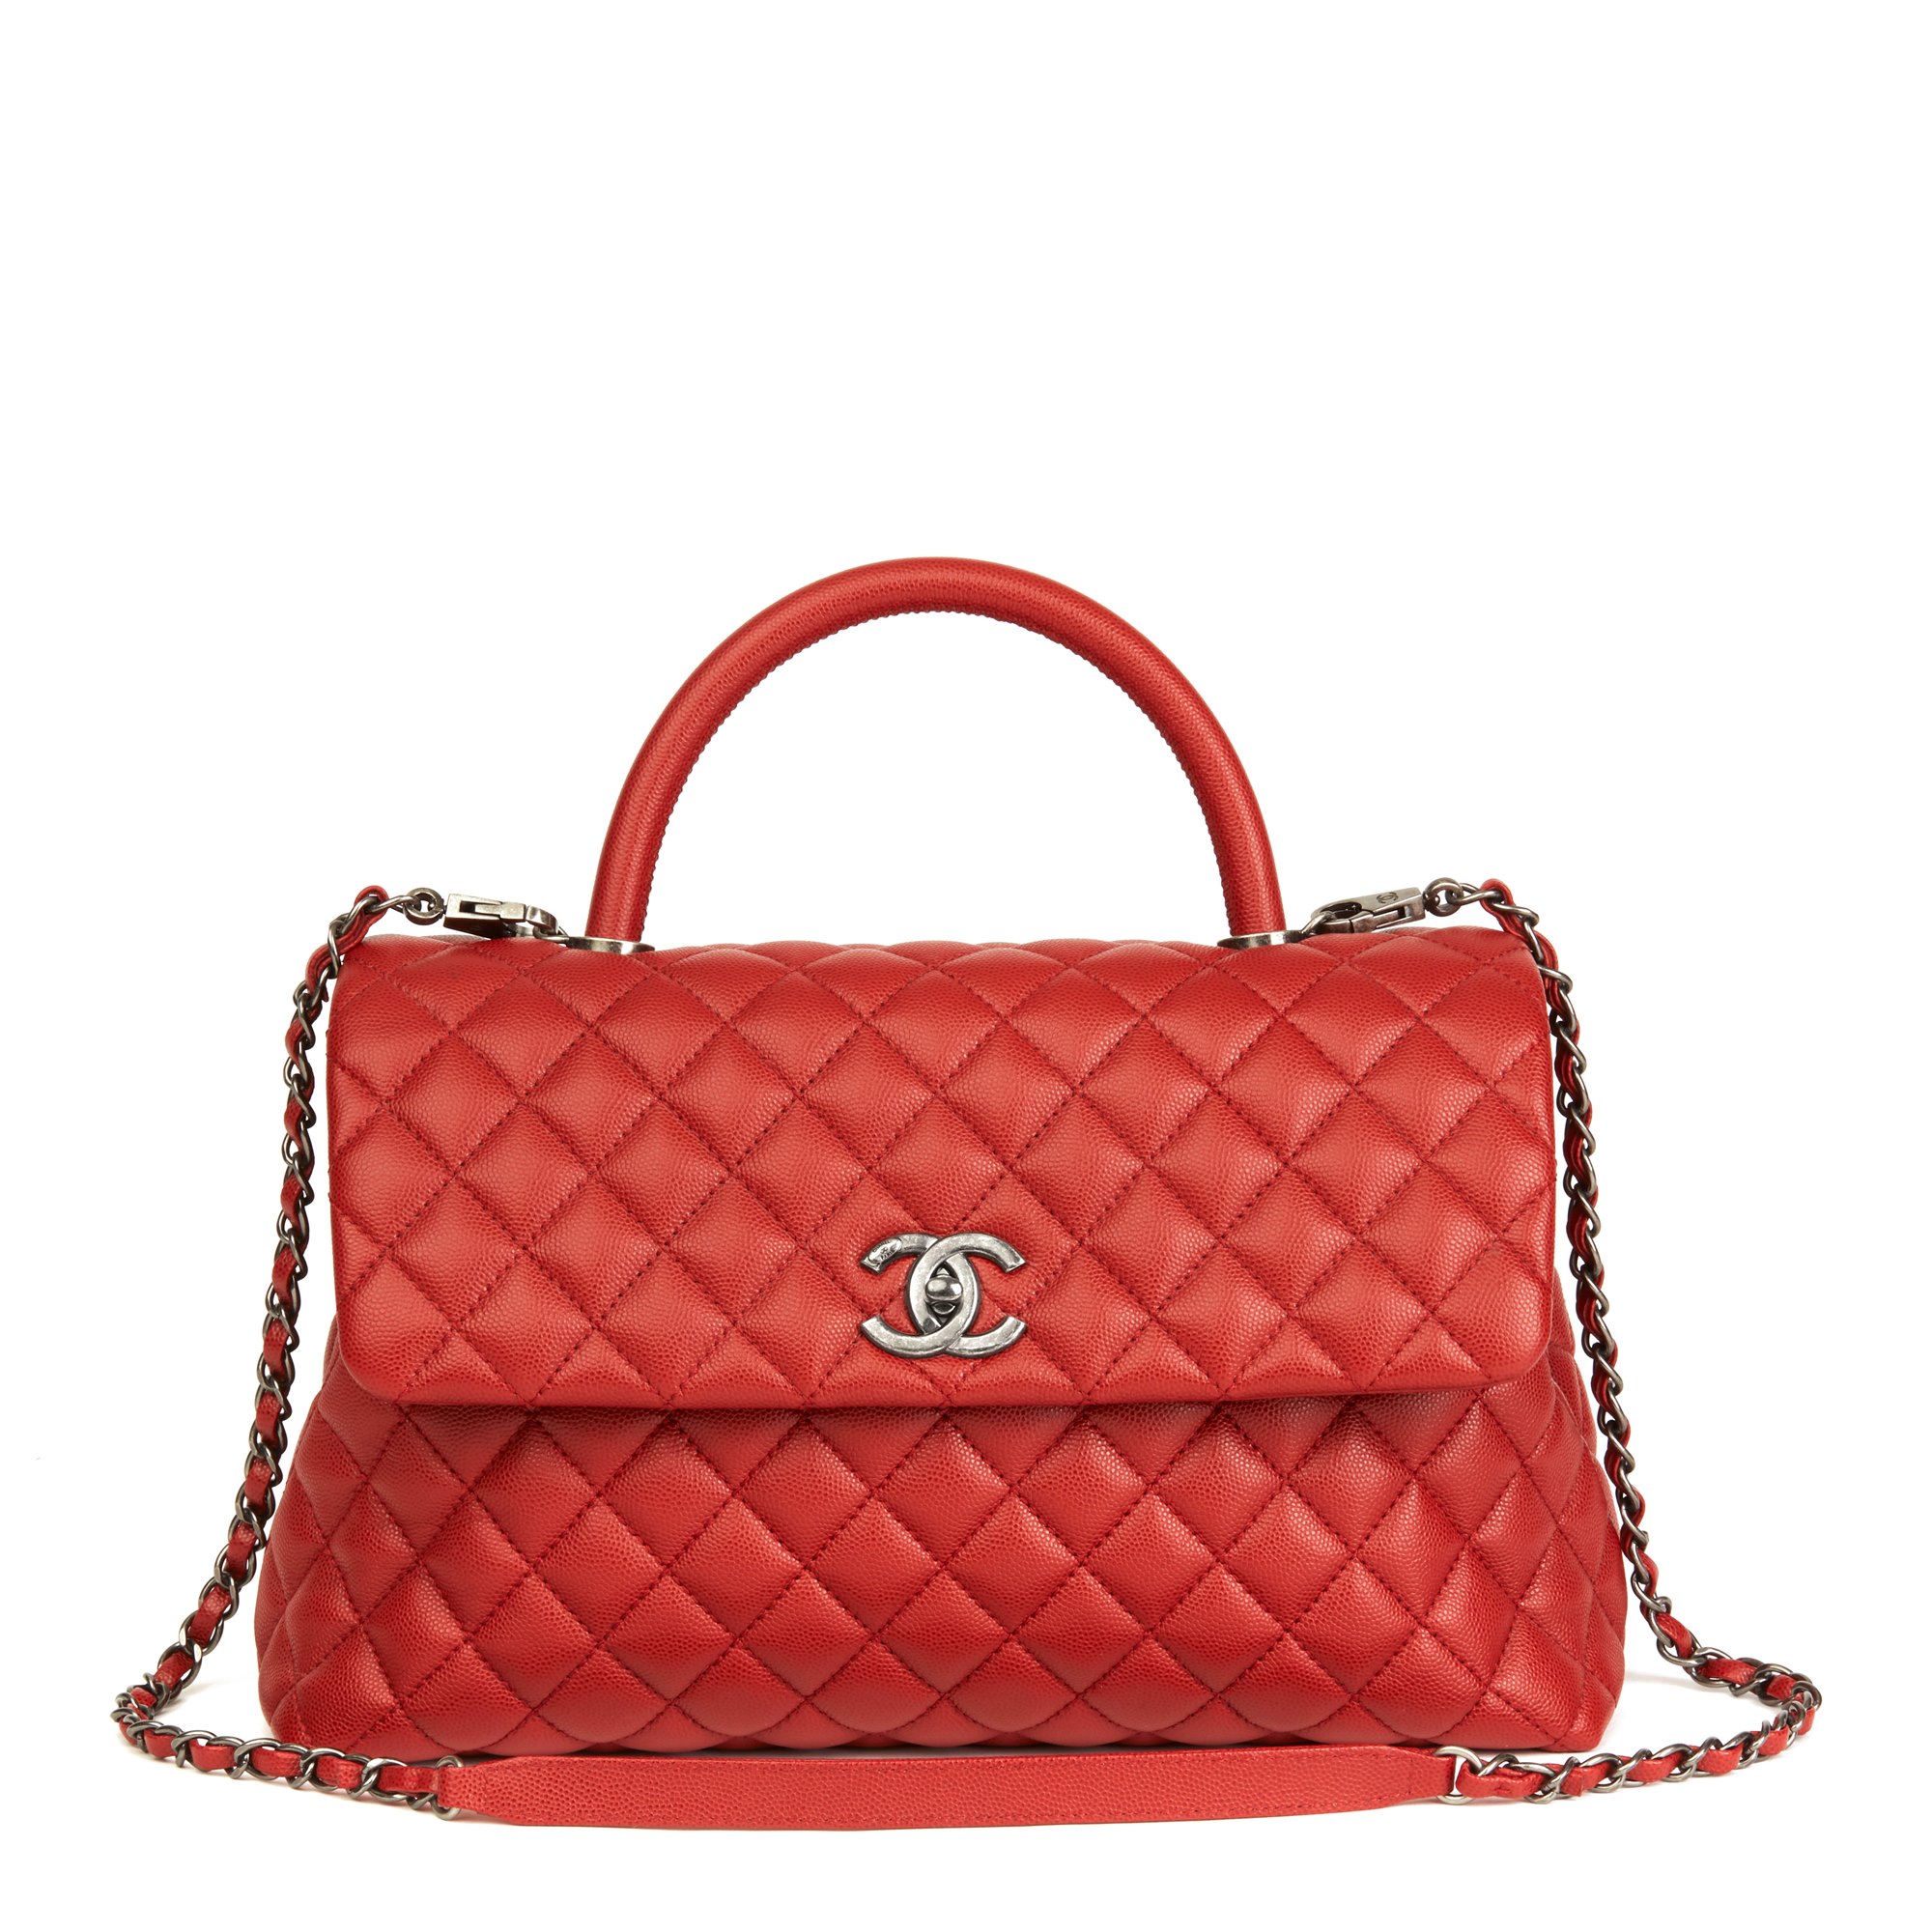 Red Coco Handle Chanel Bagtrendy Girls Guys Clothes On Sale 21 New Fashion Products Off 51 Free Shipping Fast Shippment